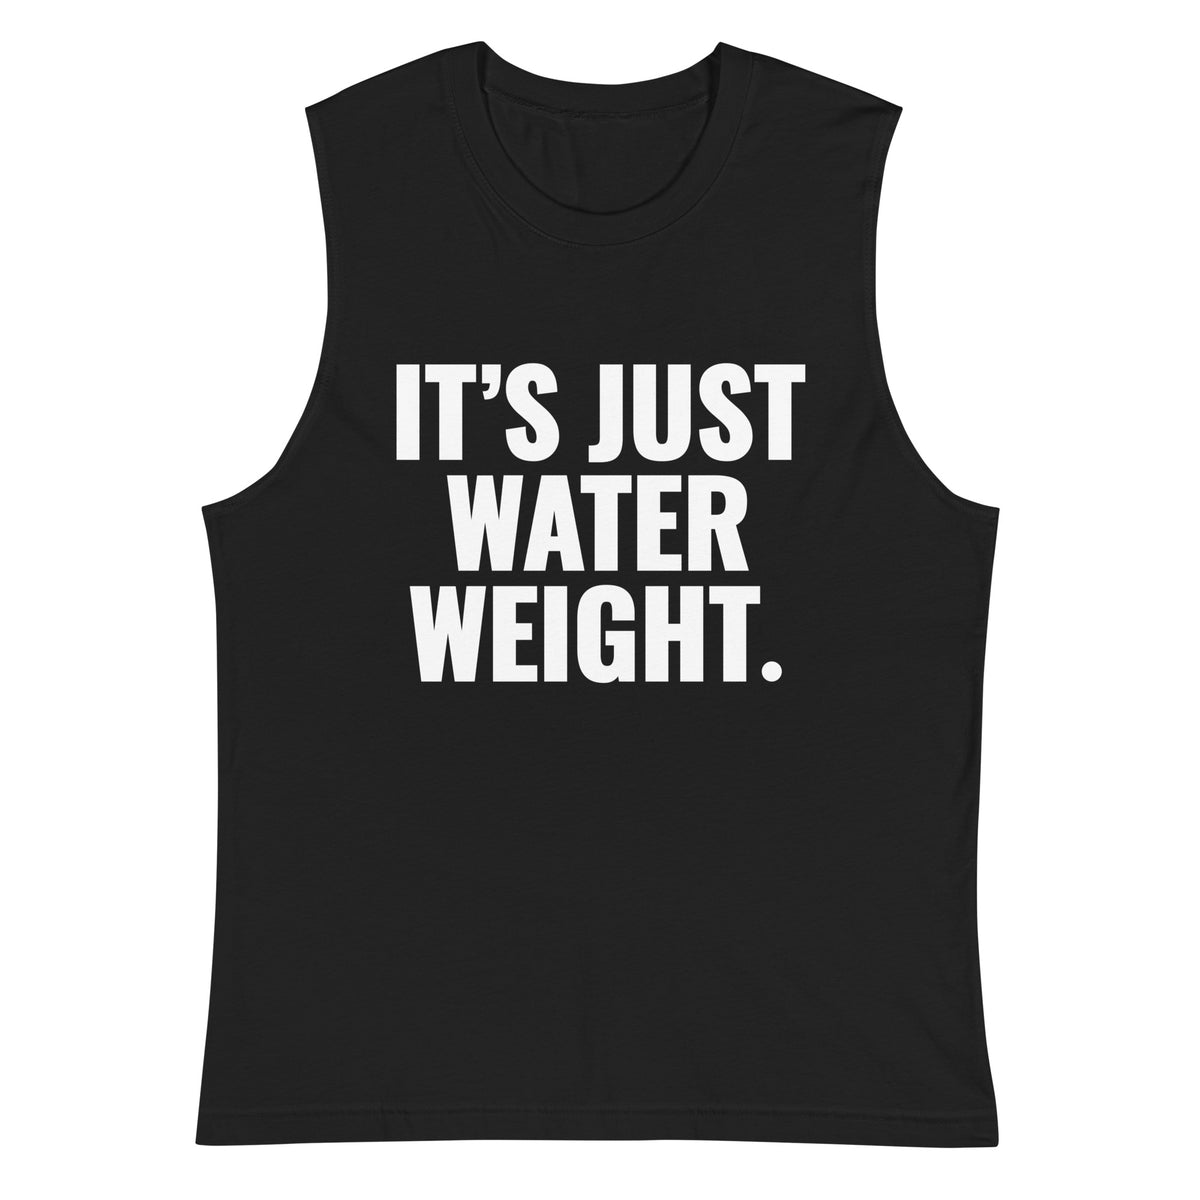 Whatever It Takes, Black Tank Top with White Lettering – 5% Nutrition